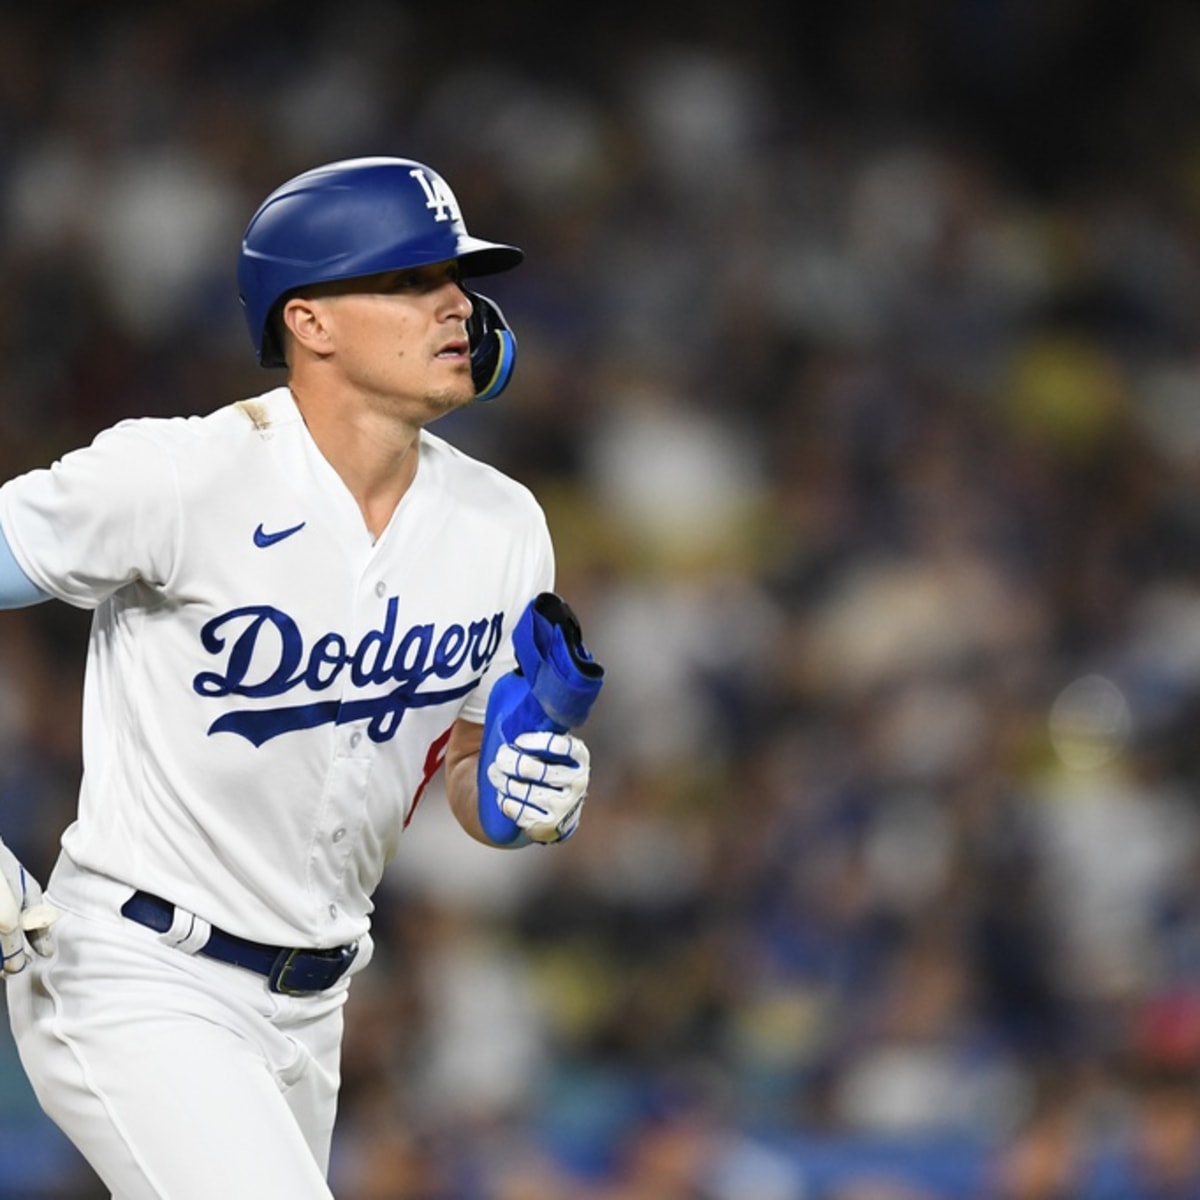 The Dodgers' bats have gone cold in the postseason. Now they're